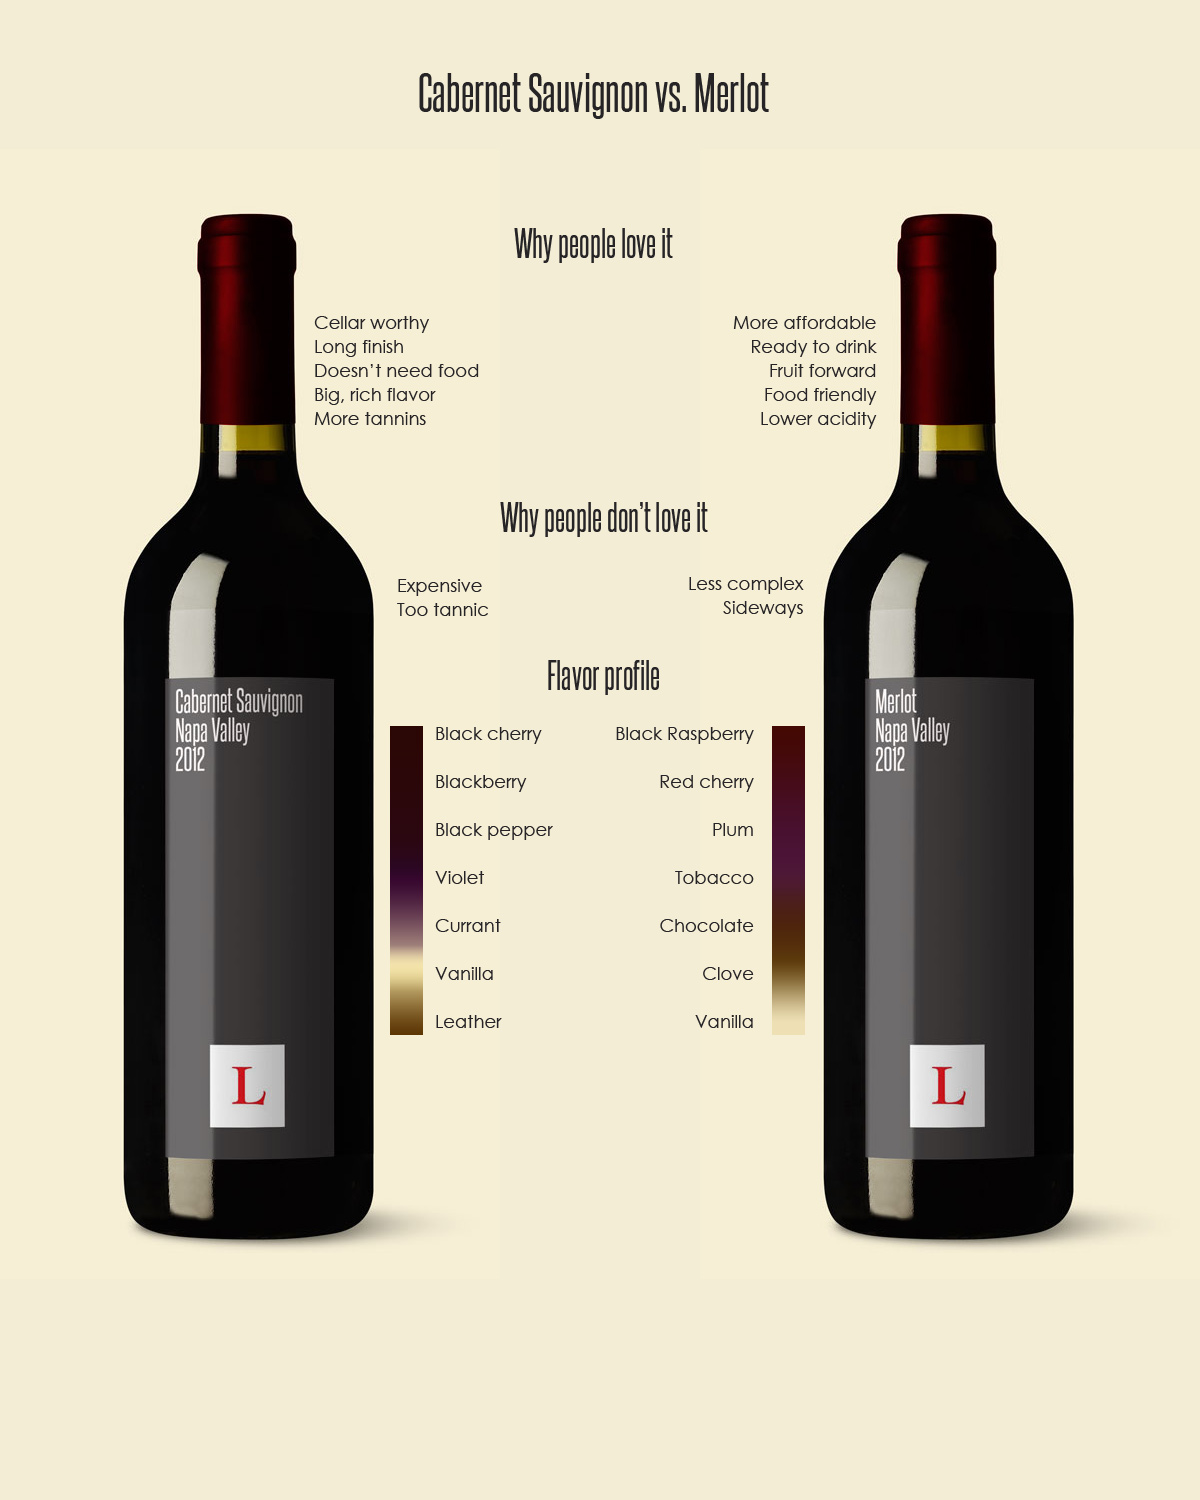 Difference Between Cabernet Sauvignon and Merlot